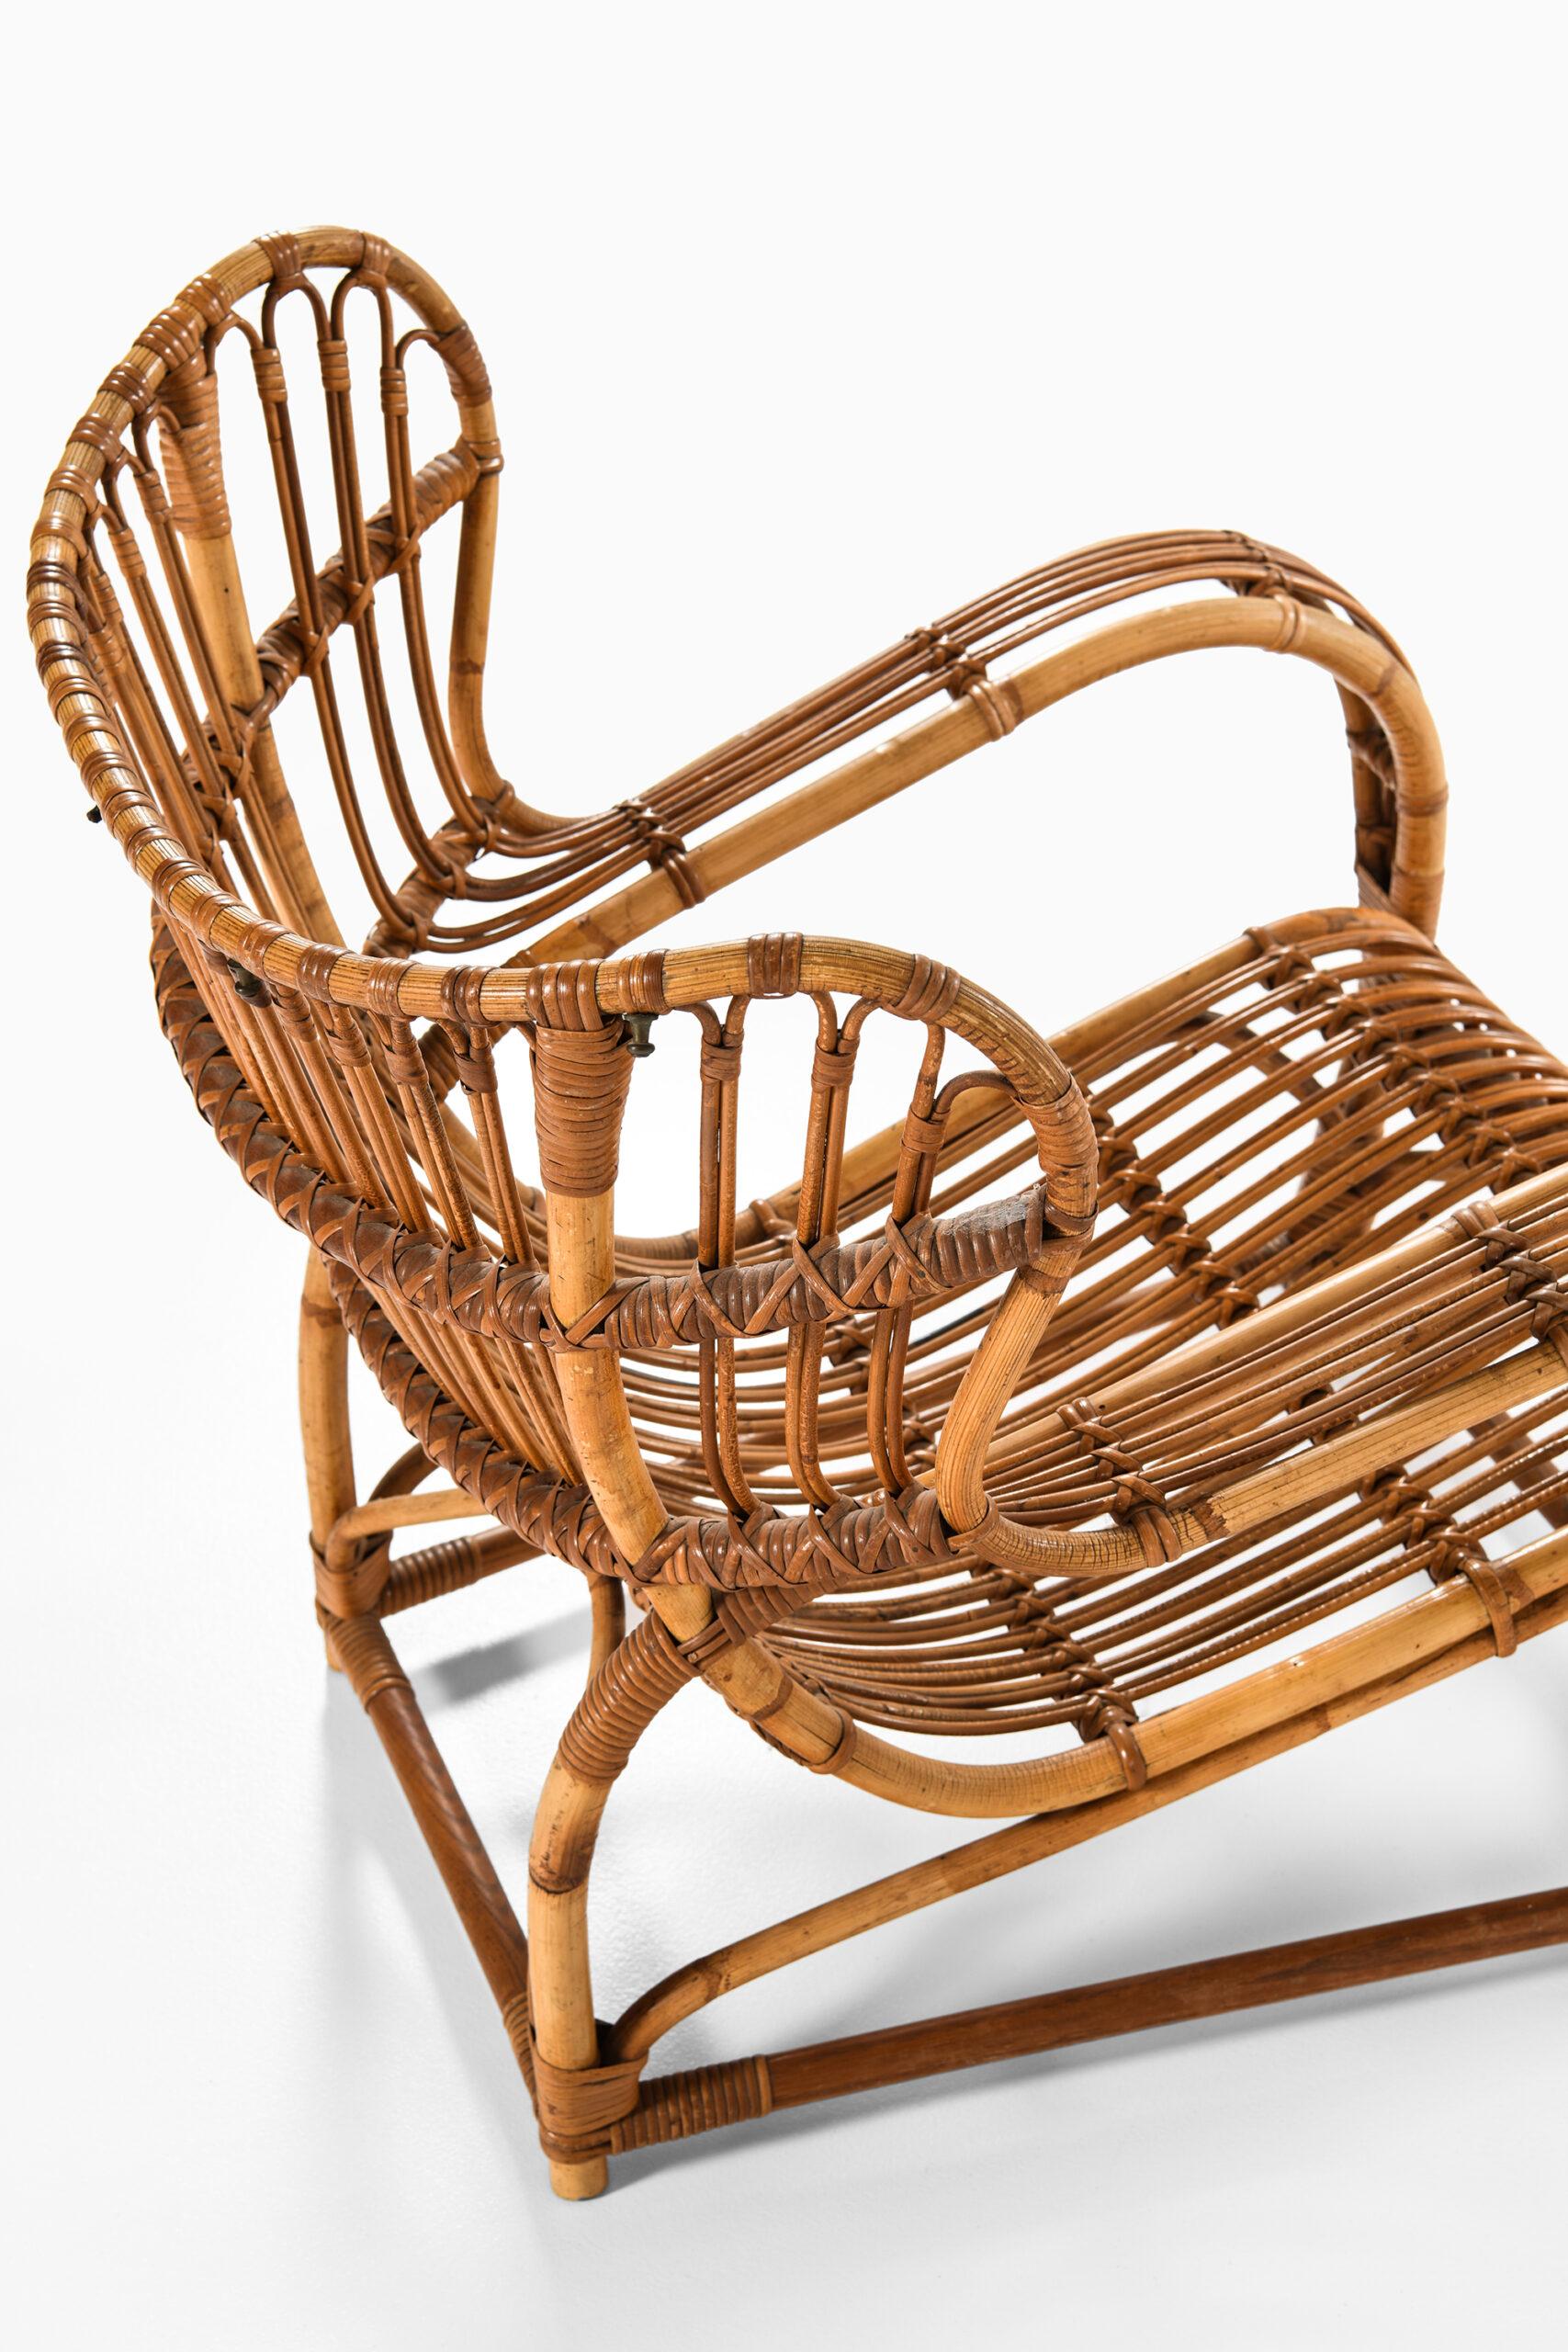 Cane Viggo Boesen Easy Chairs Model 3440 Produced by R. Wengler in Denmark For Sale